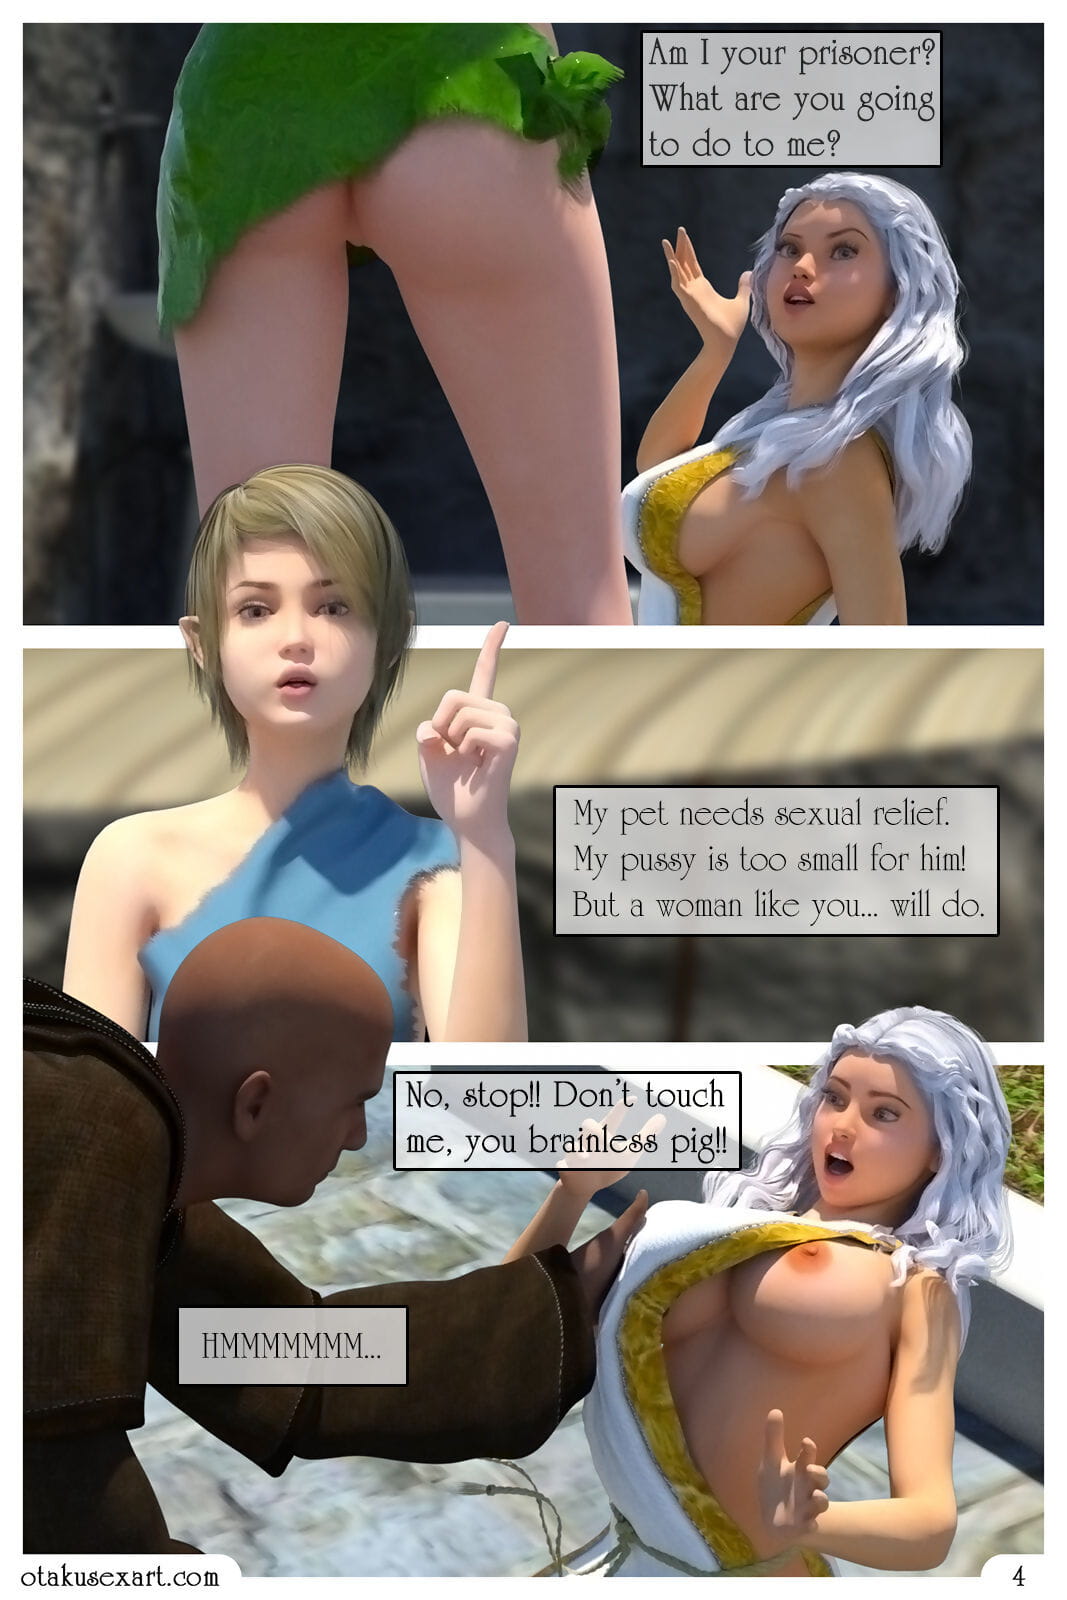 Looking for Trouble - 3D Sex Comic - part 2 page 1